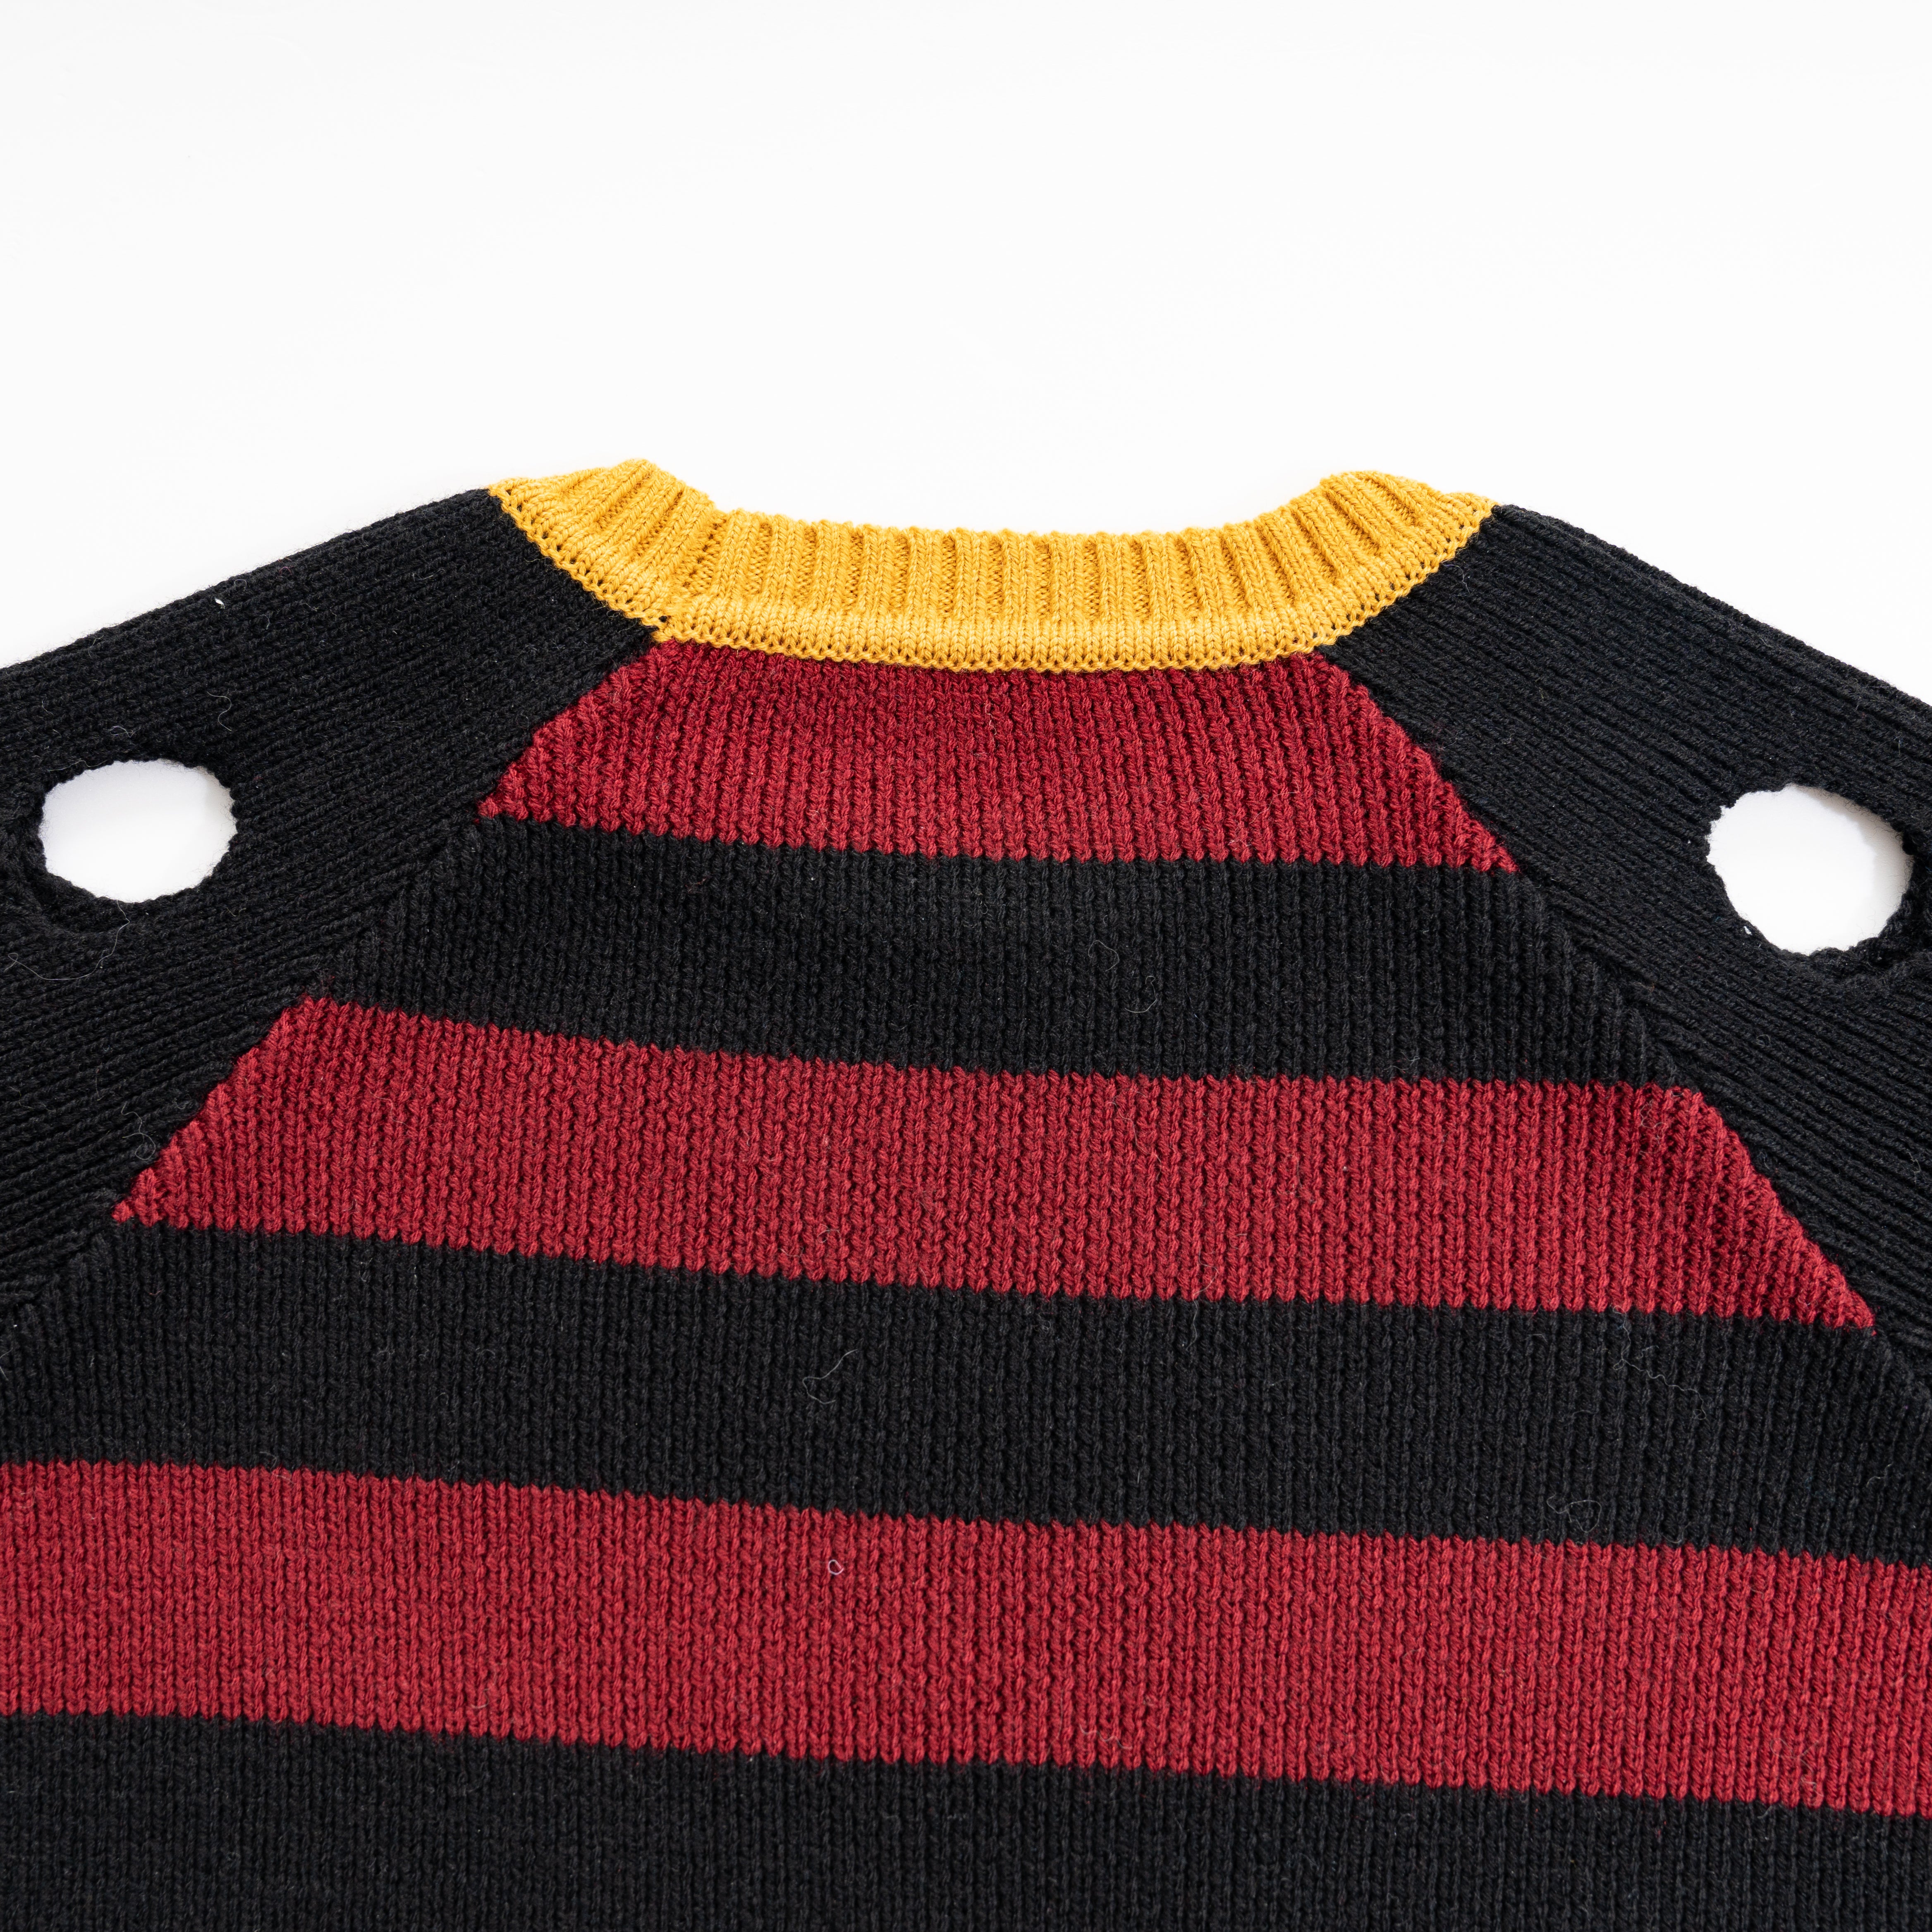 black sweater with red stripes with holes in shoulder